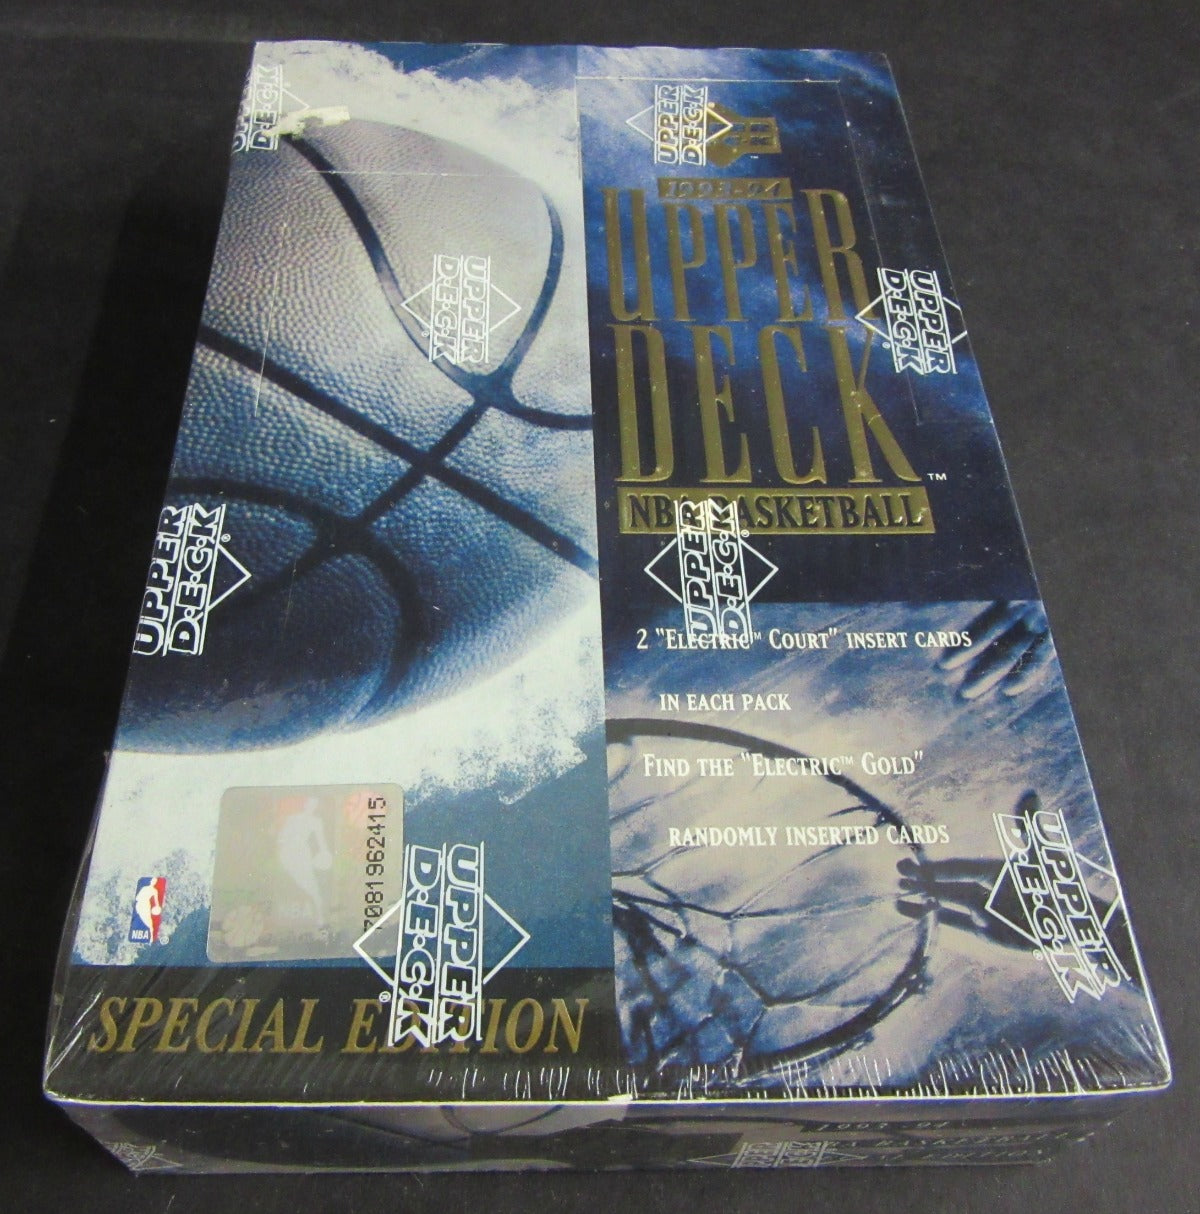 1993/94 Upper Deck Special Edition SE Basketball Box (Retail)